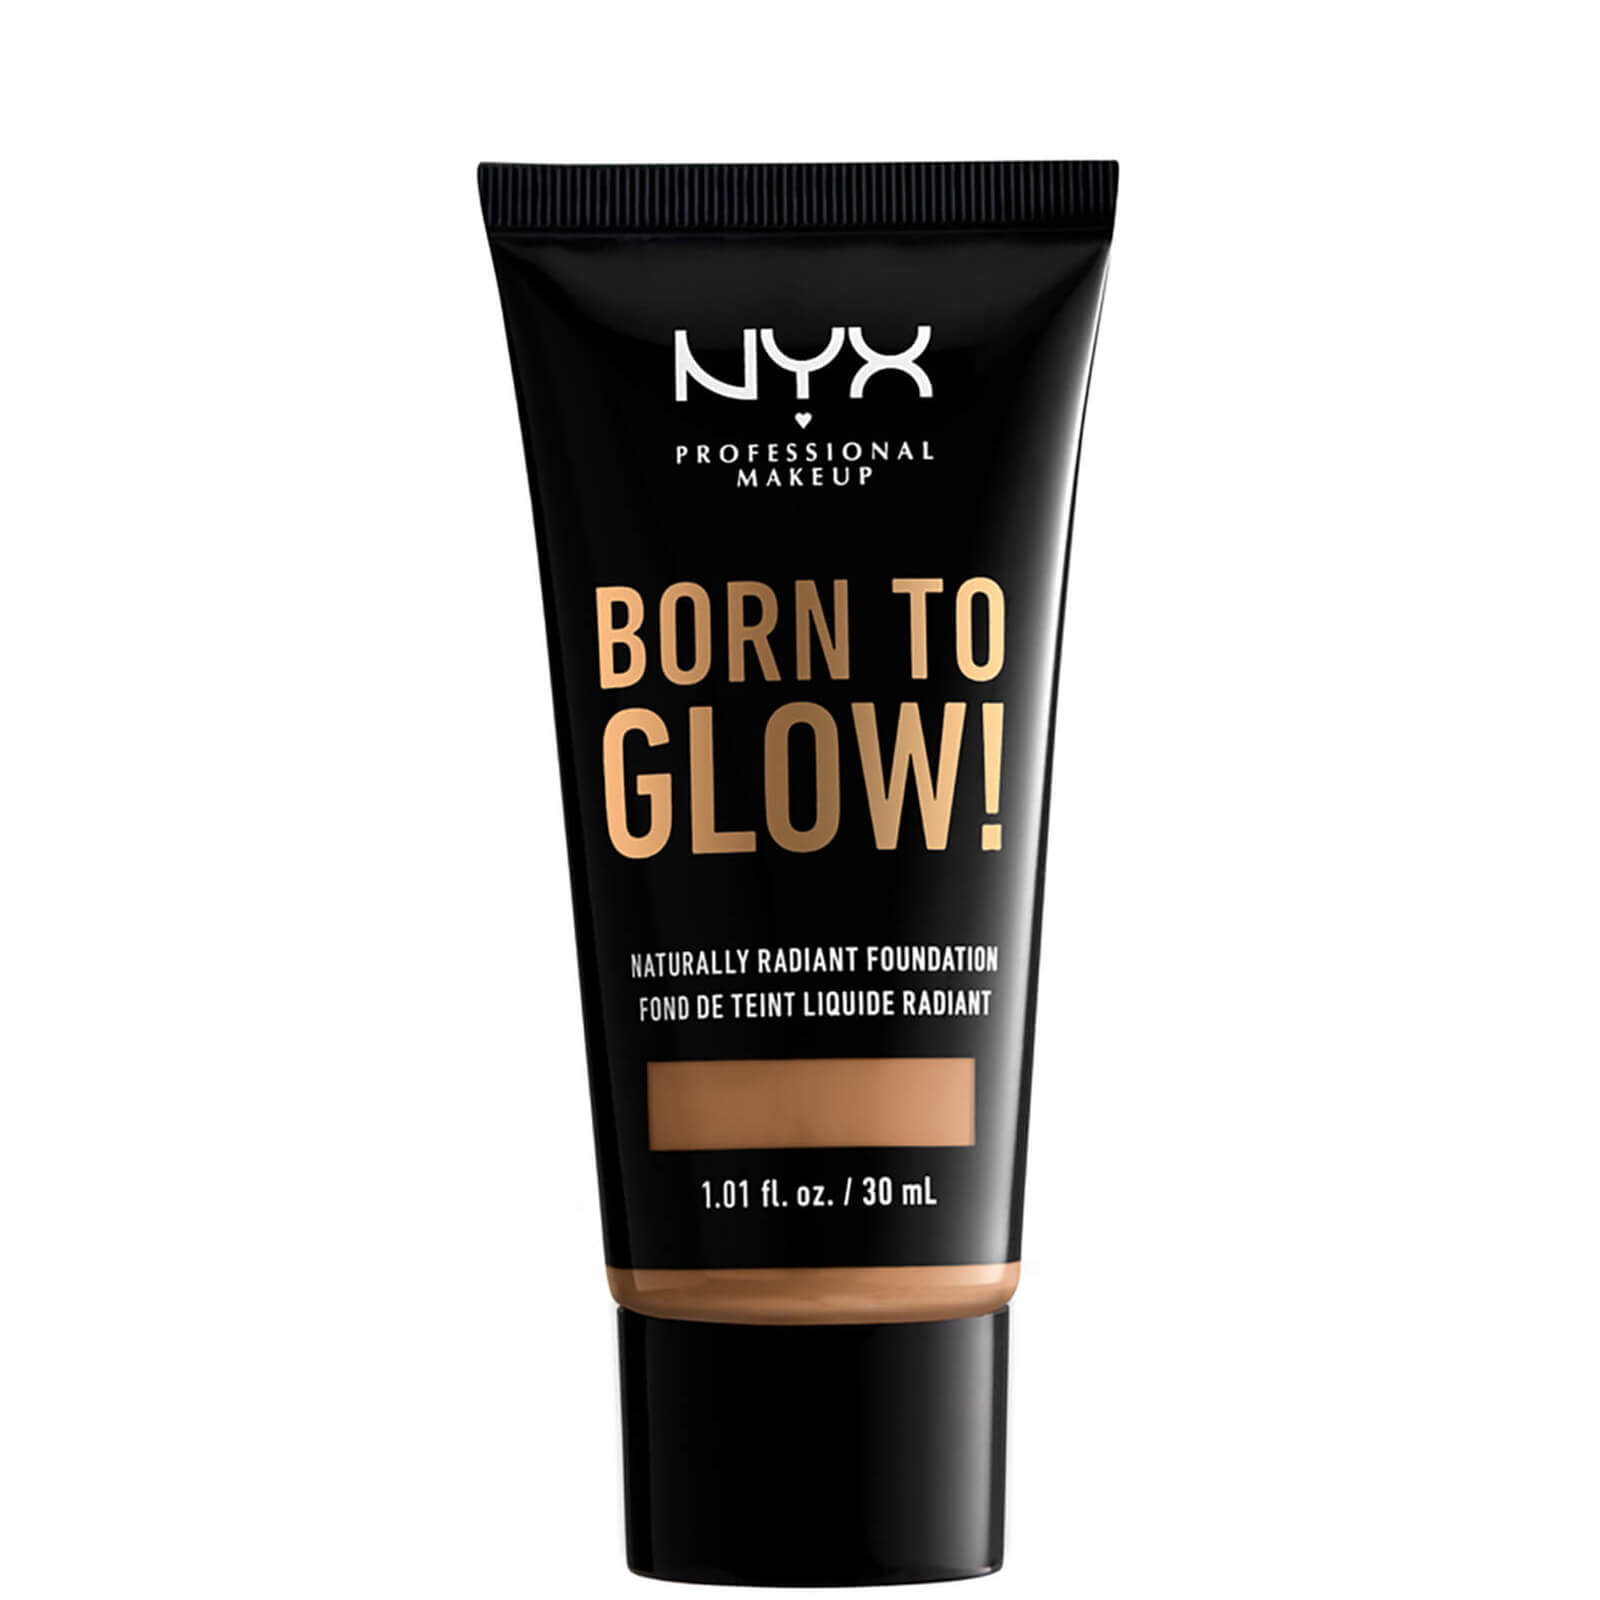 nyx professional makeup born to glow naturally radiant foundation 30ml (various shades) - golden honey